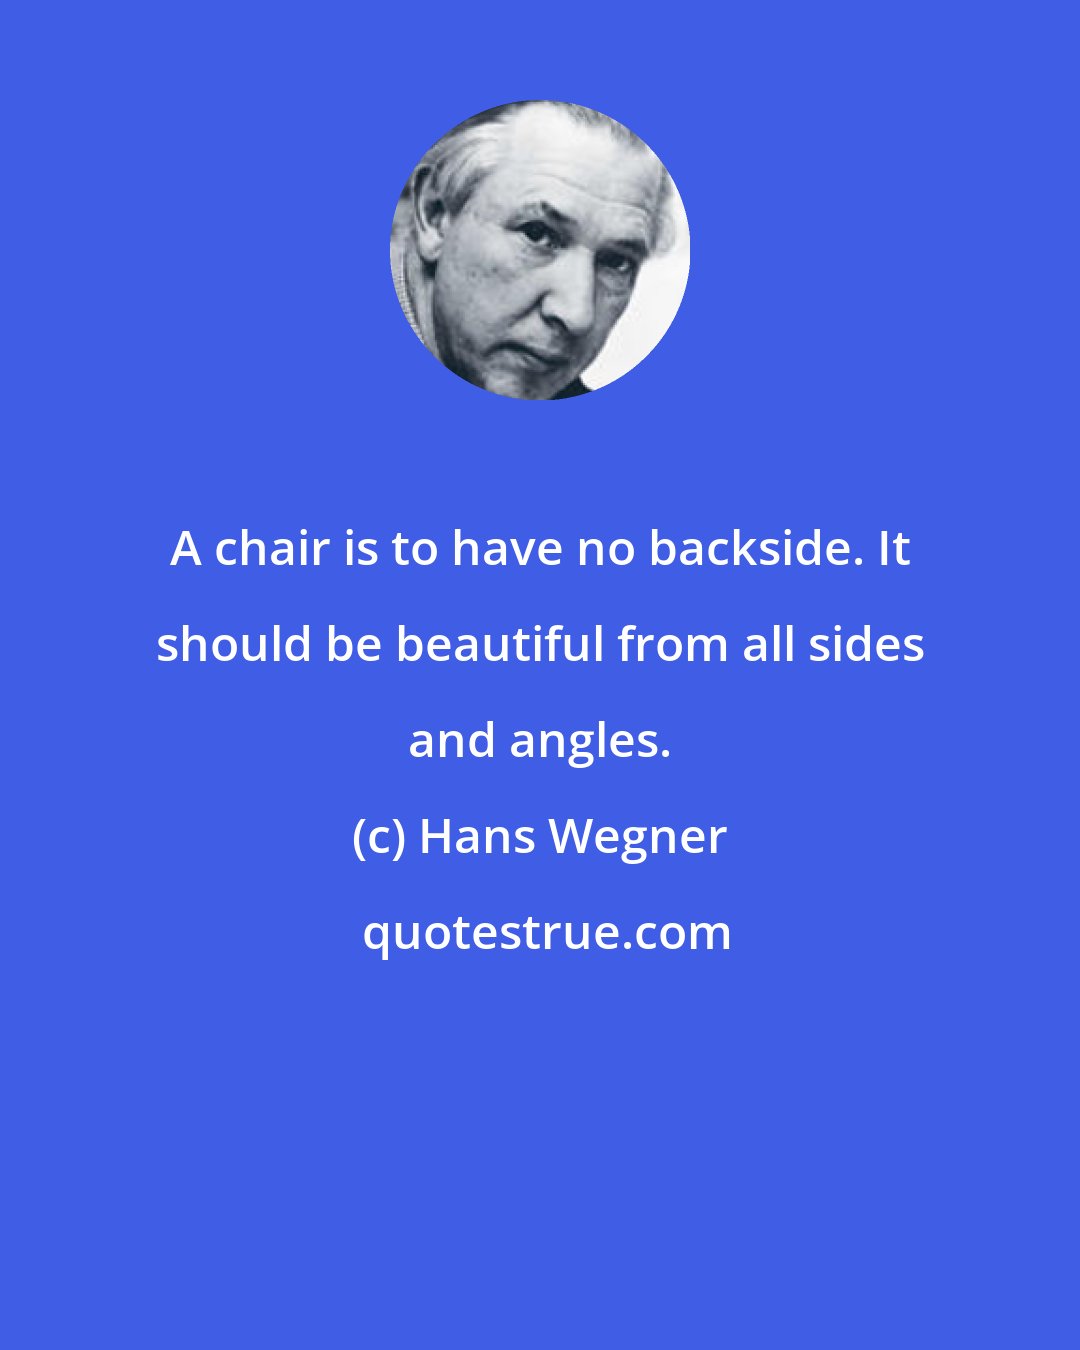 Hans Wegner: A chair is to have no backside. It should be beautiful from all sides and angles.